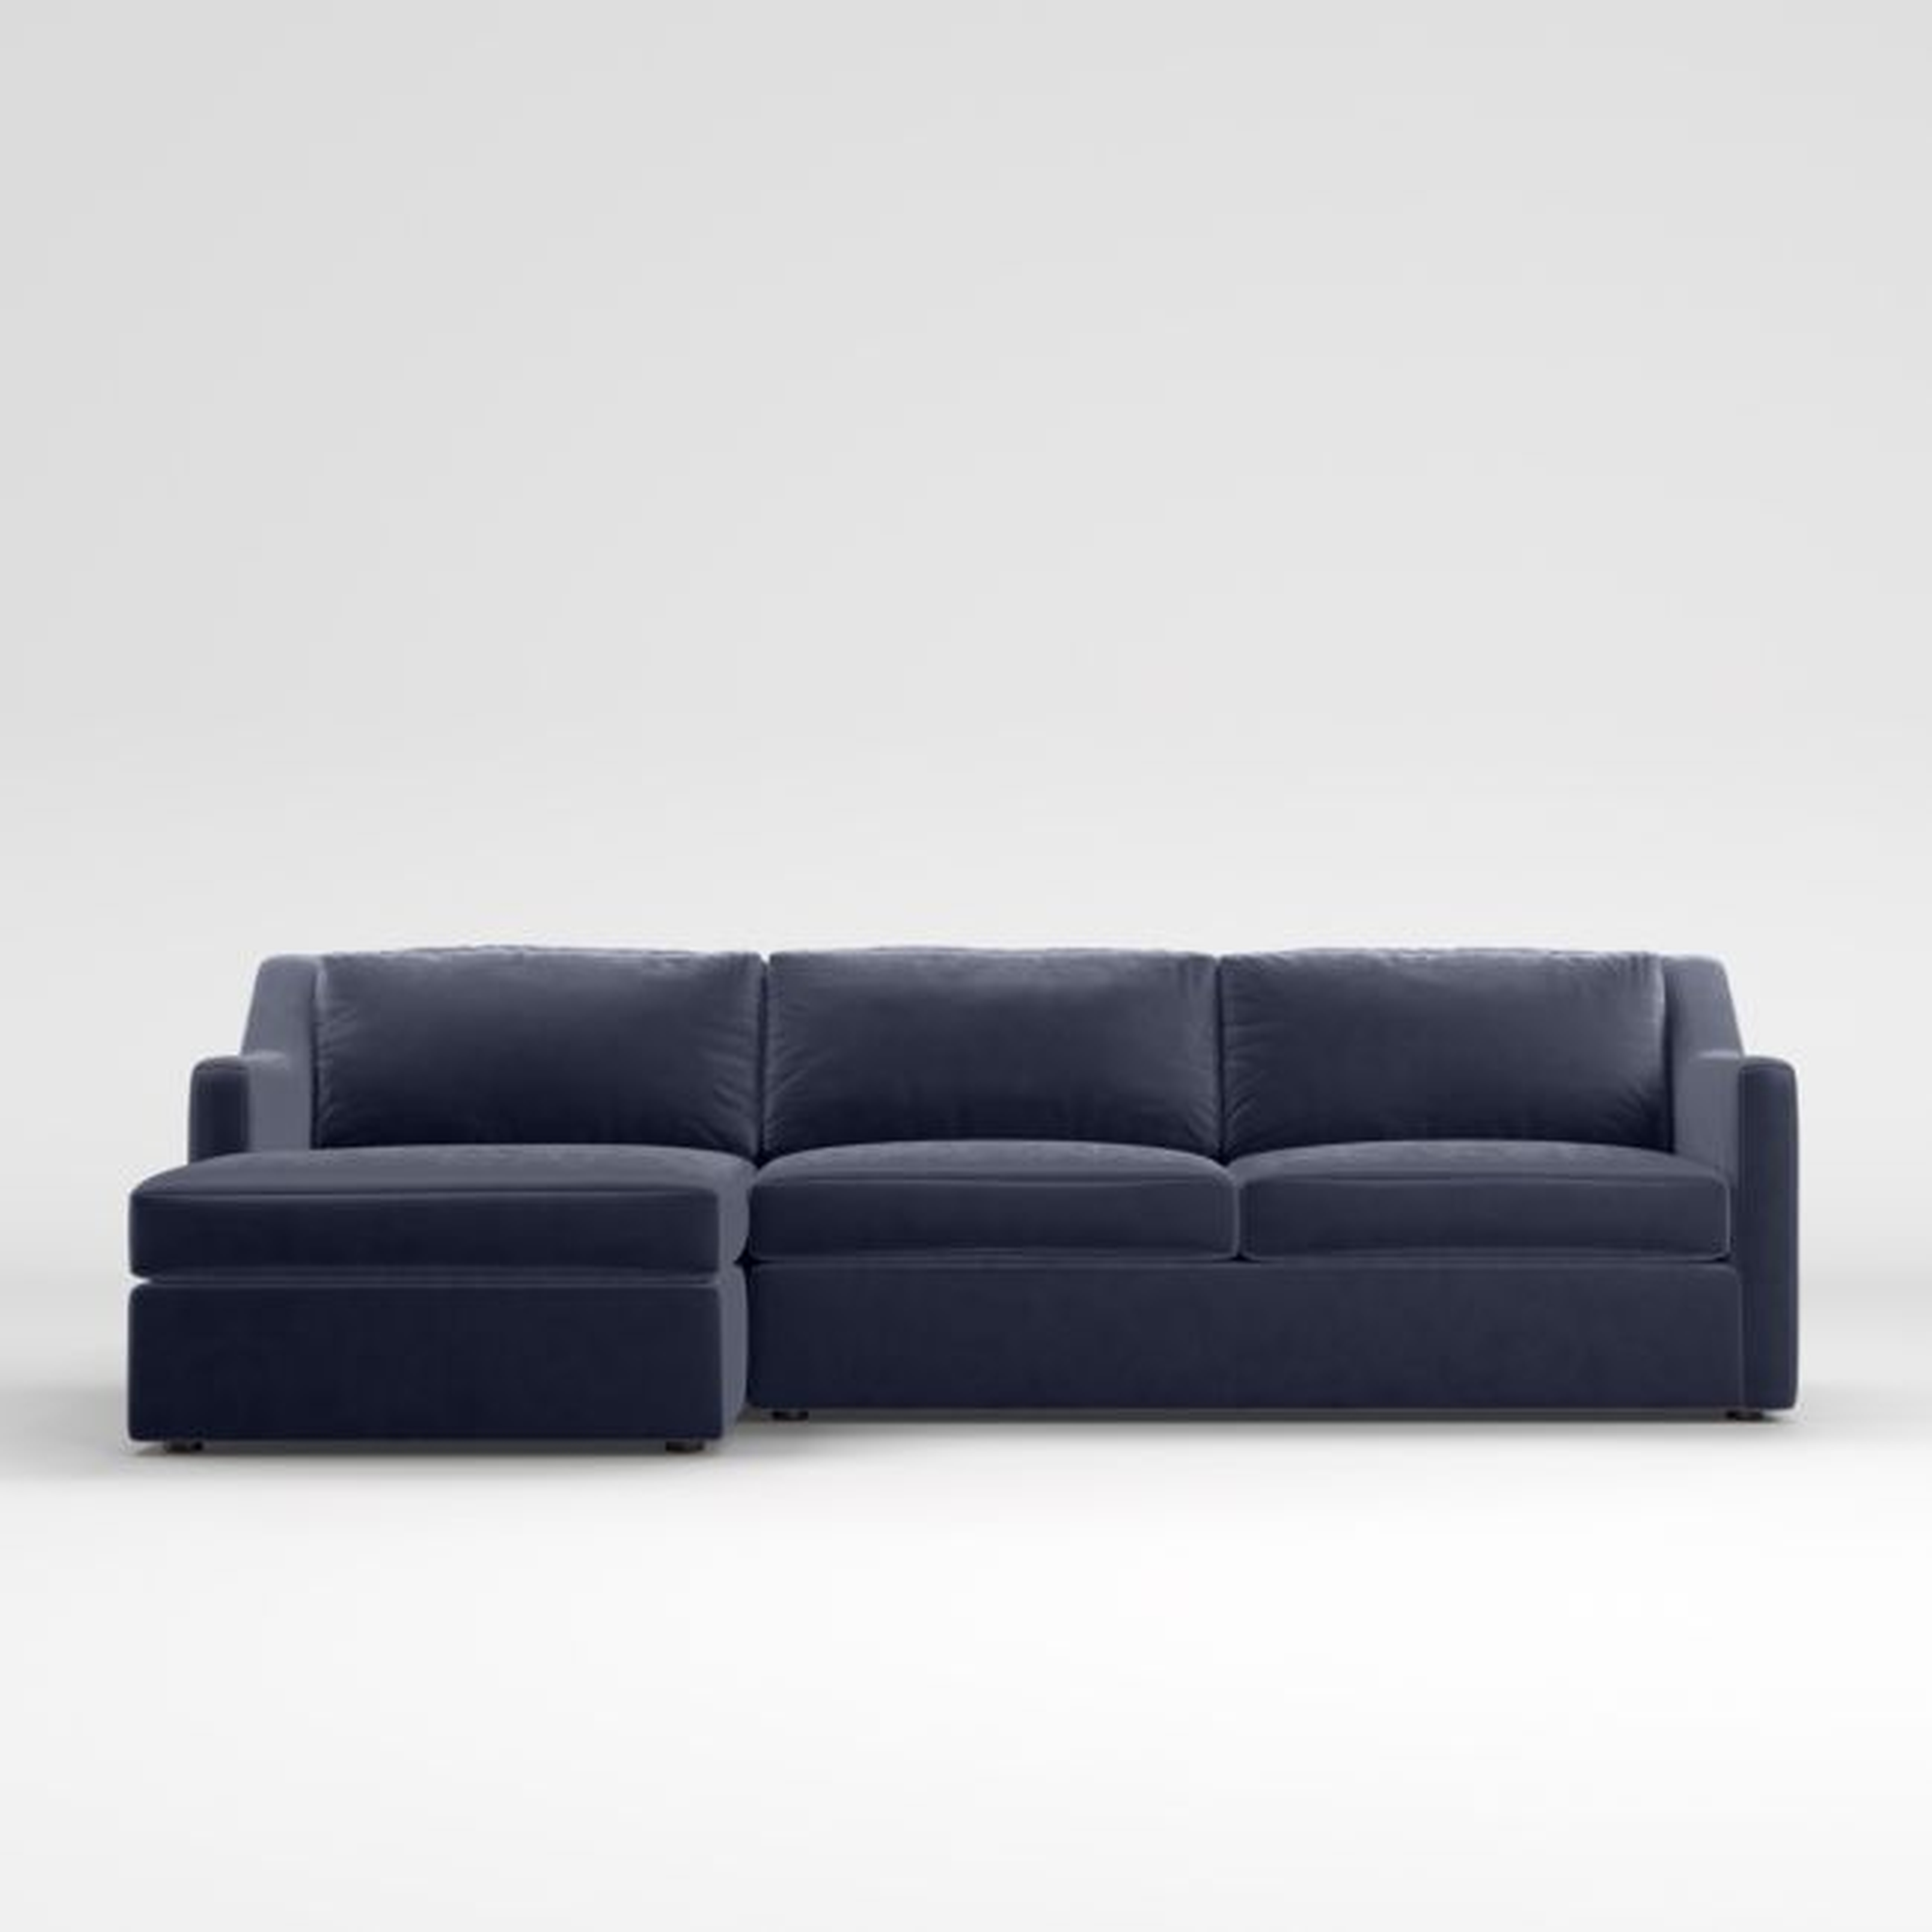 Notch 2-Piece Sectional Sofa - Crate and Barrel